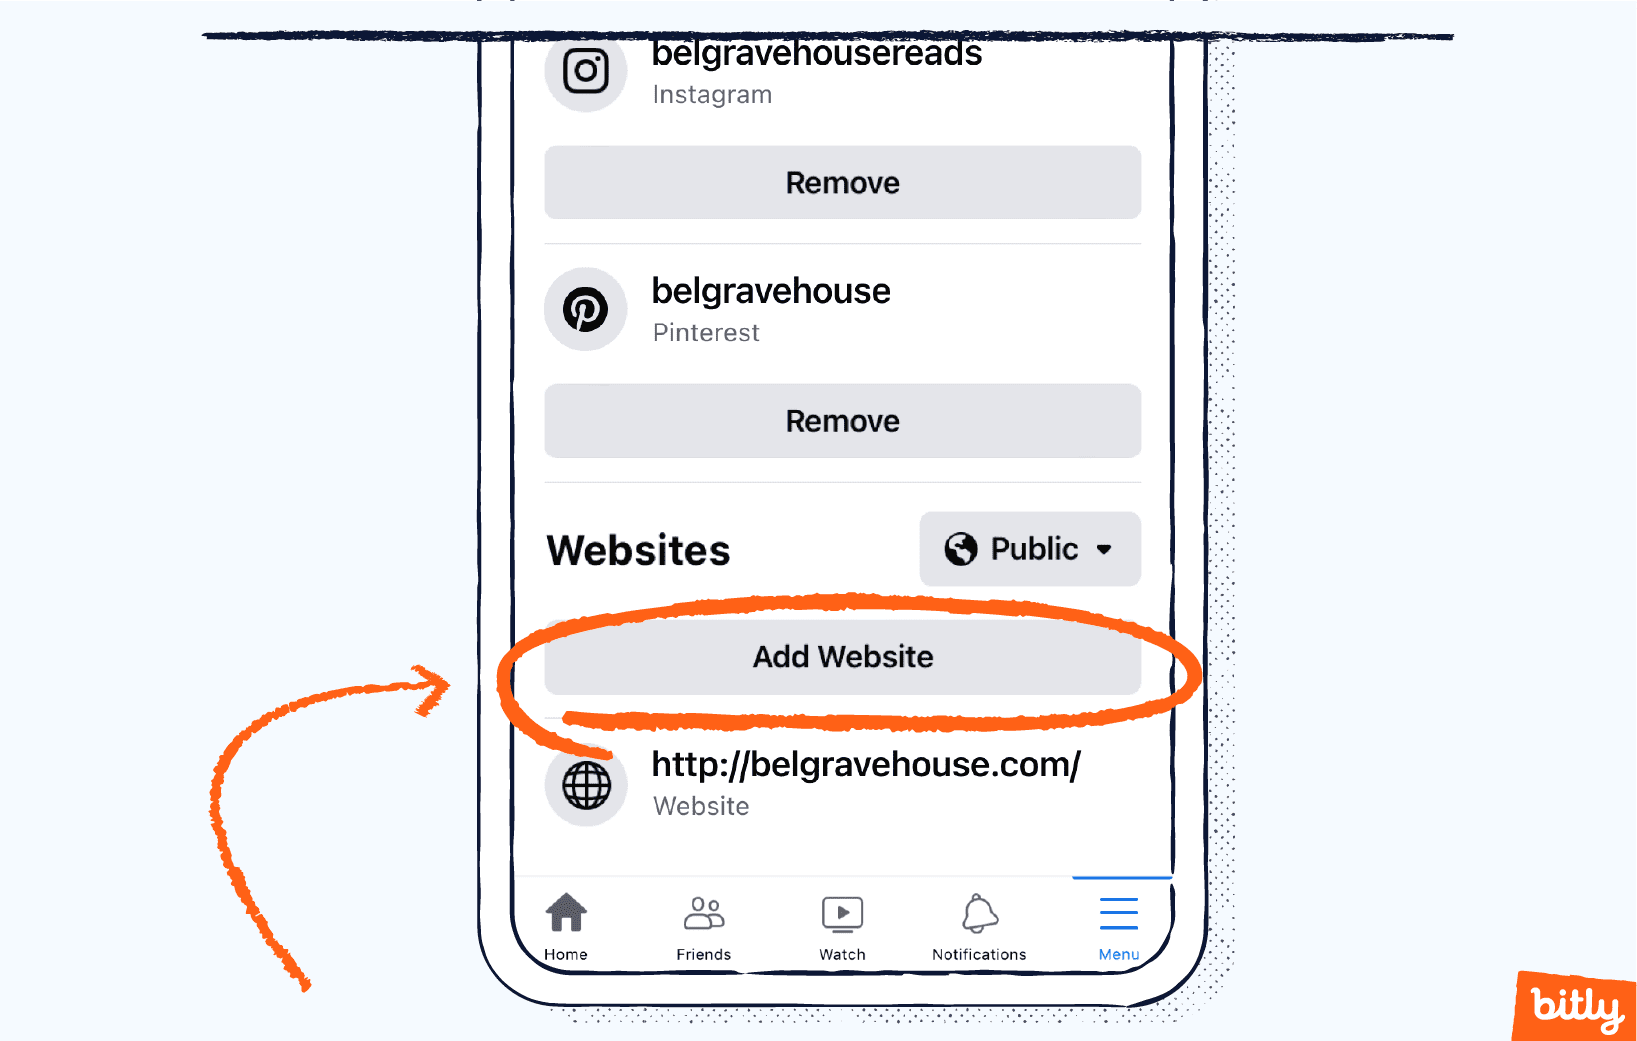 An orange arrow pointing to an Add Website button on a Facebook account on a mobile phone.